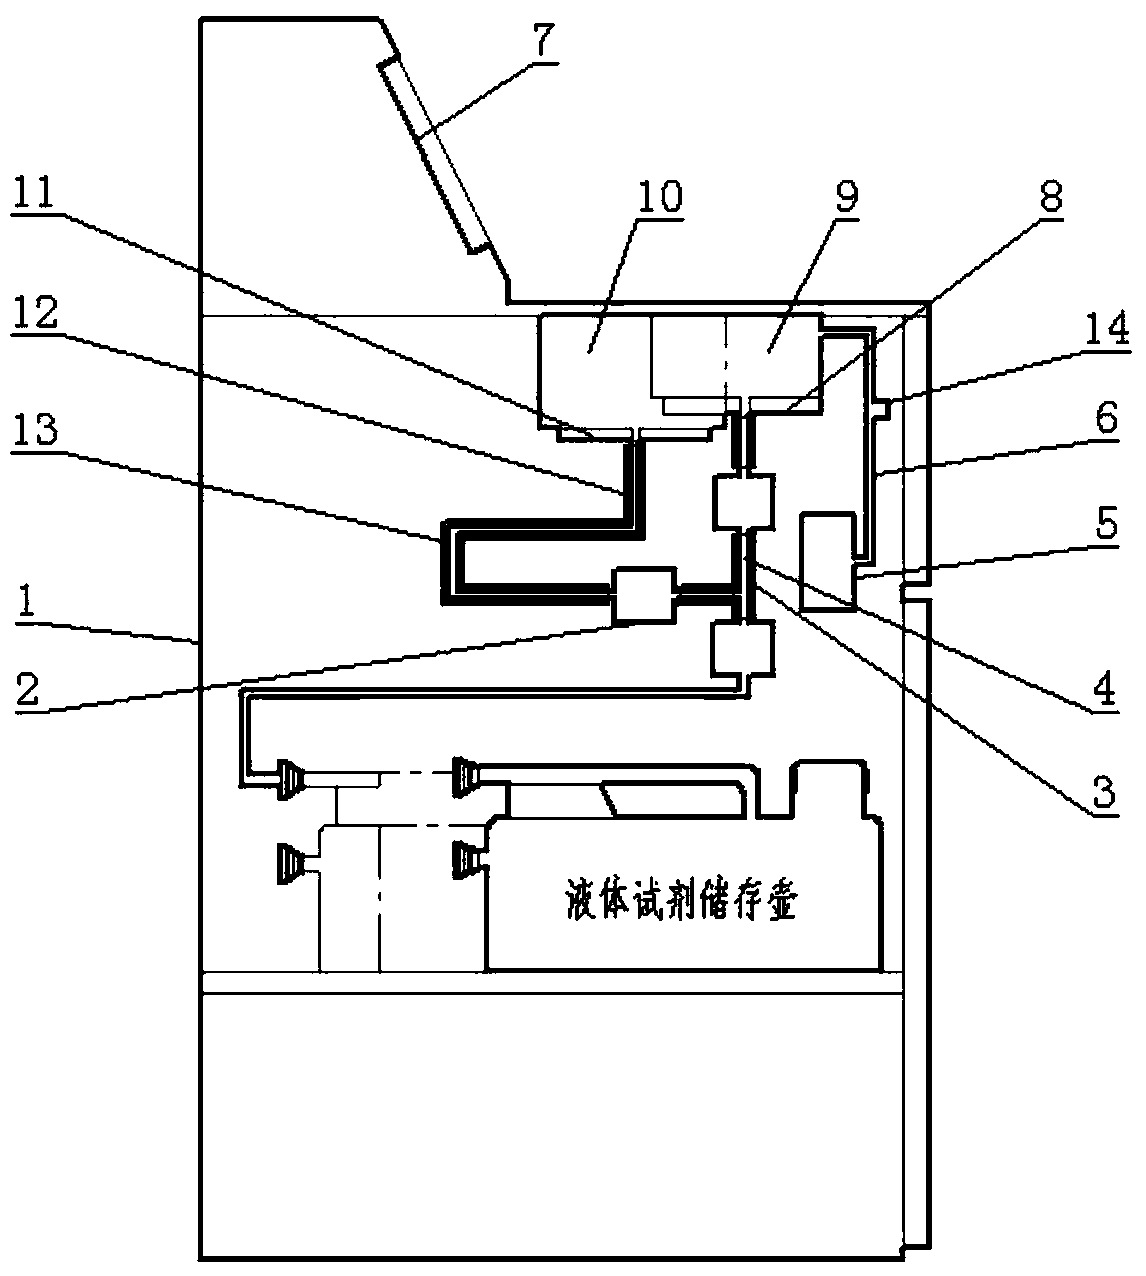 Method for Preventing Wax Blockage in Pipeline of Fully Enclosed Automatic Dehydrator and Its Anti-Clogging Wax Heating Control System